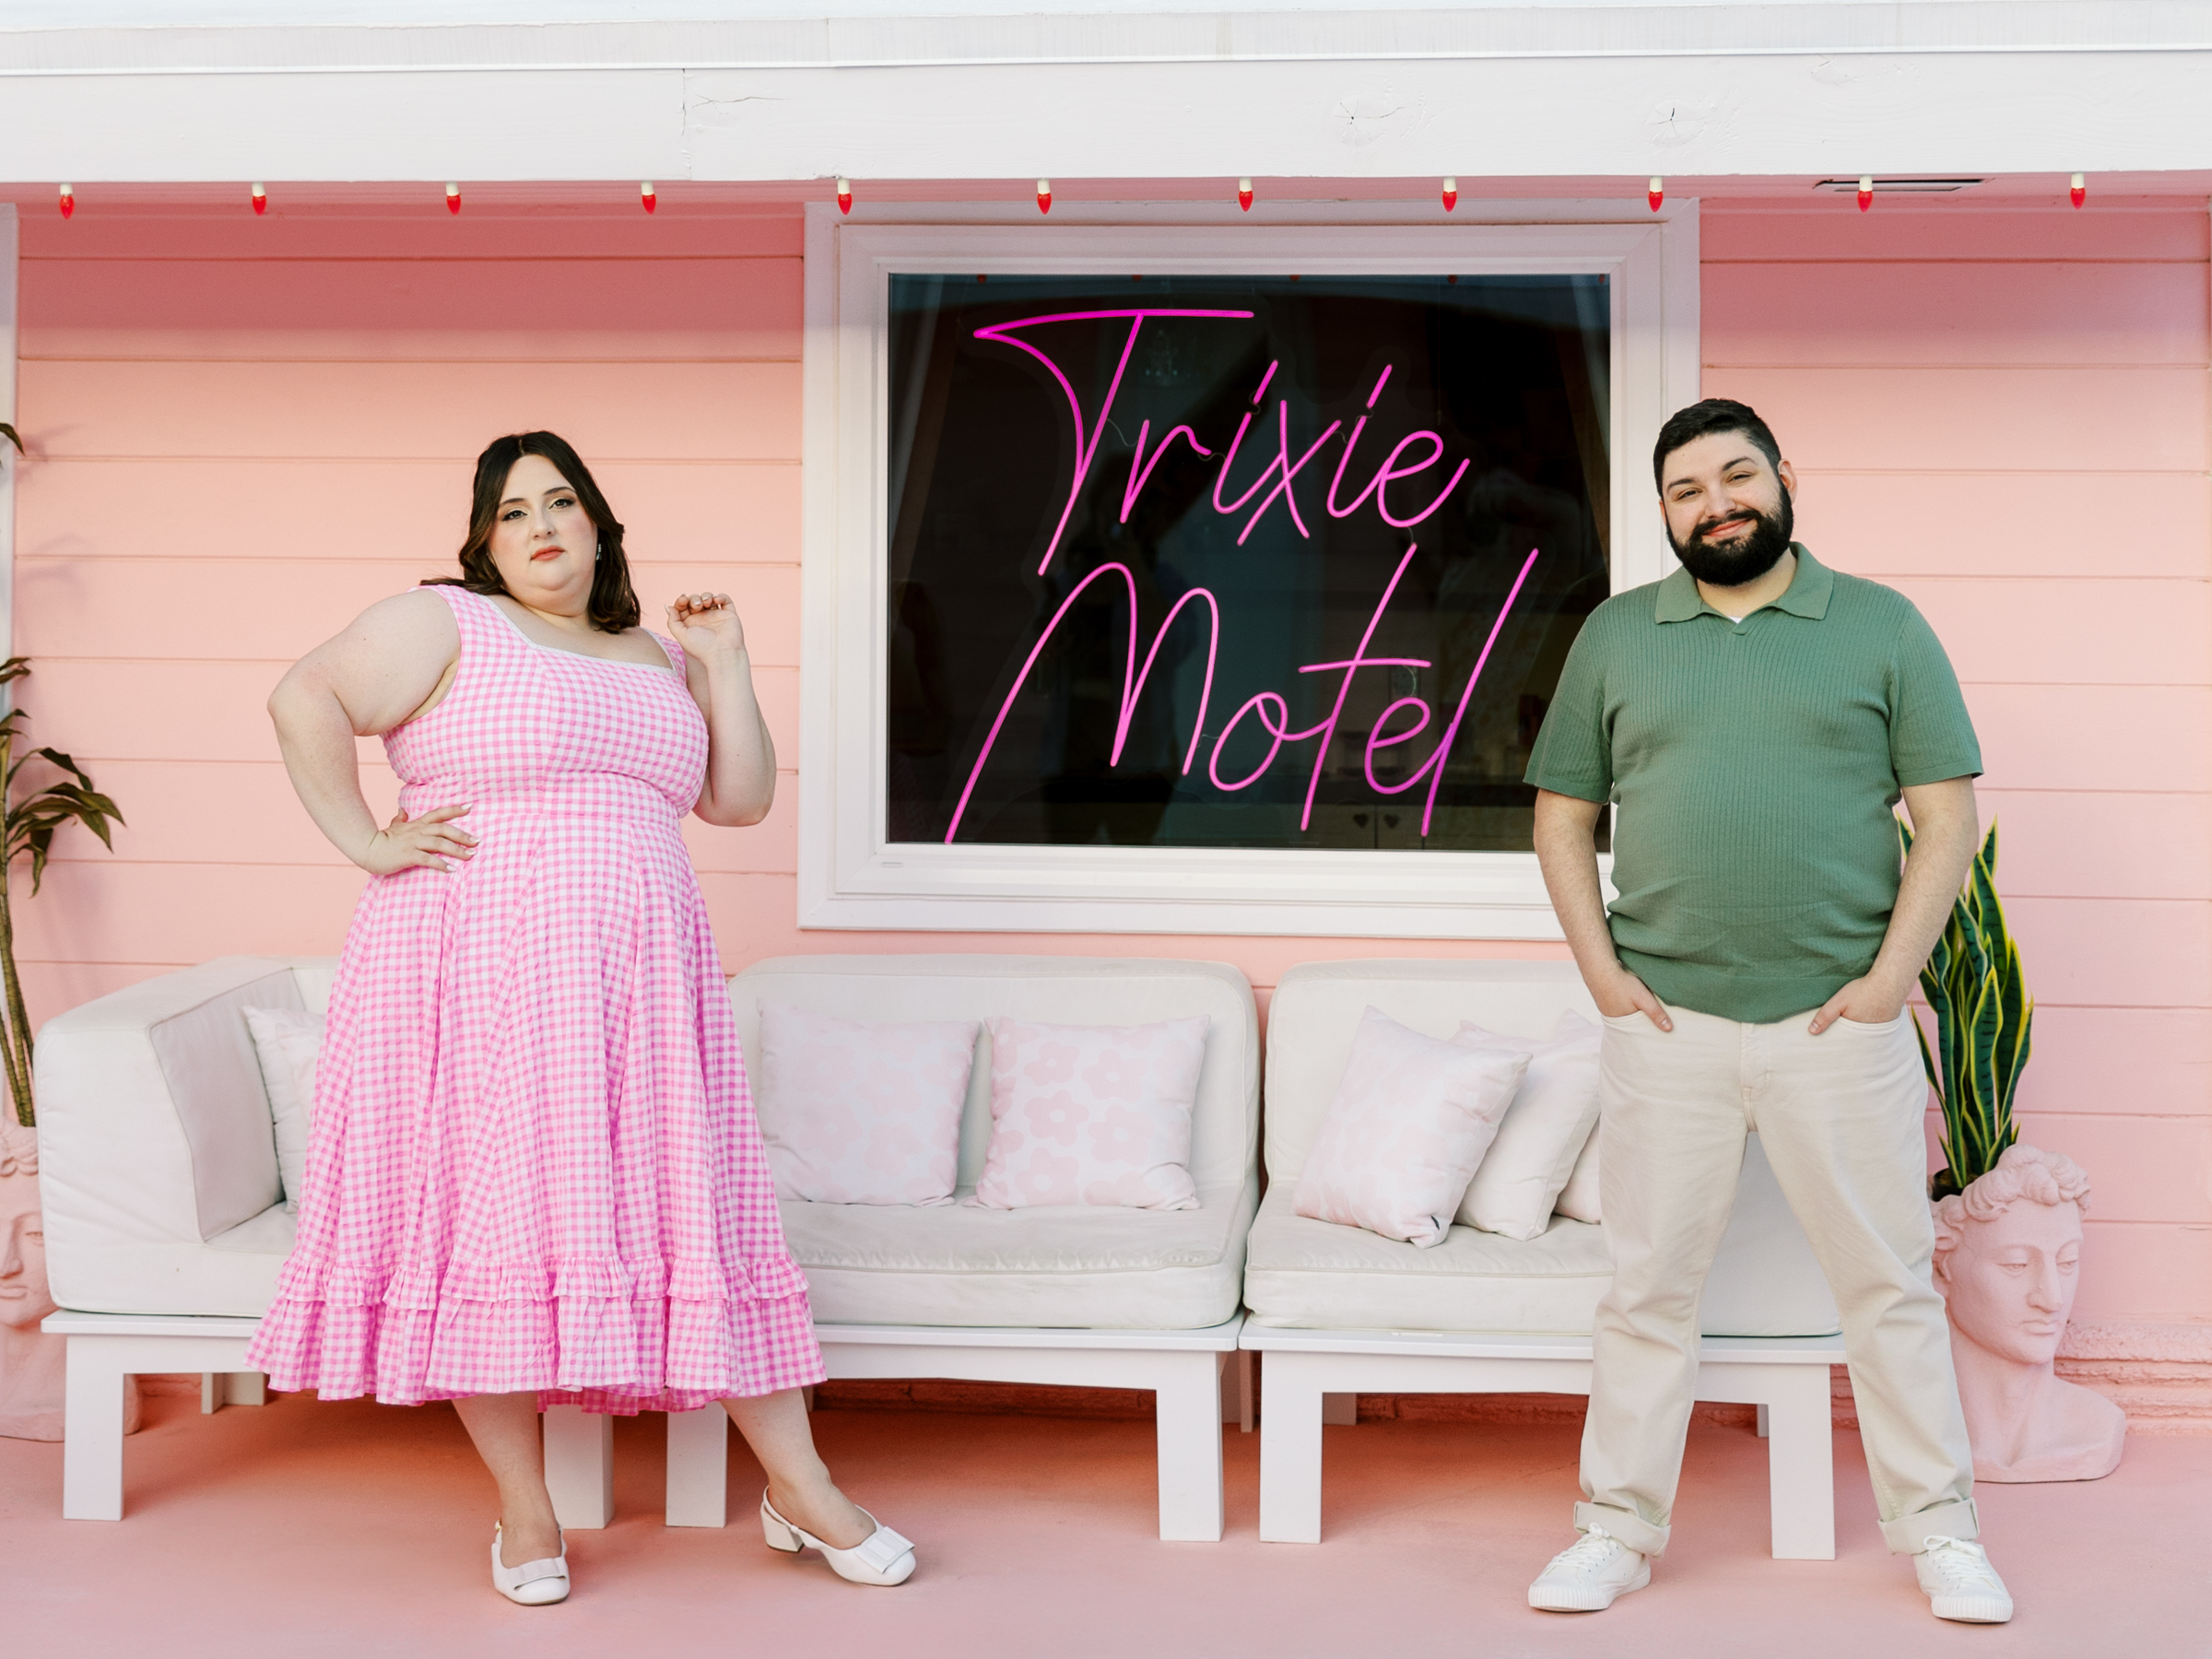 A couple stands on either side of the window with the neon Trixie Motel sign